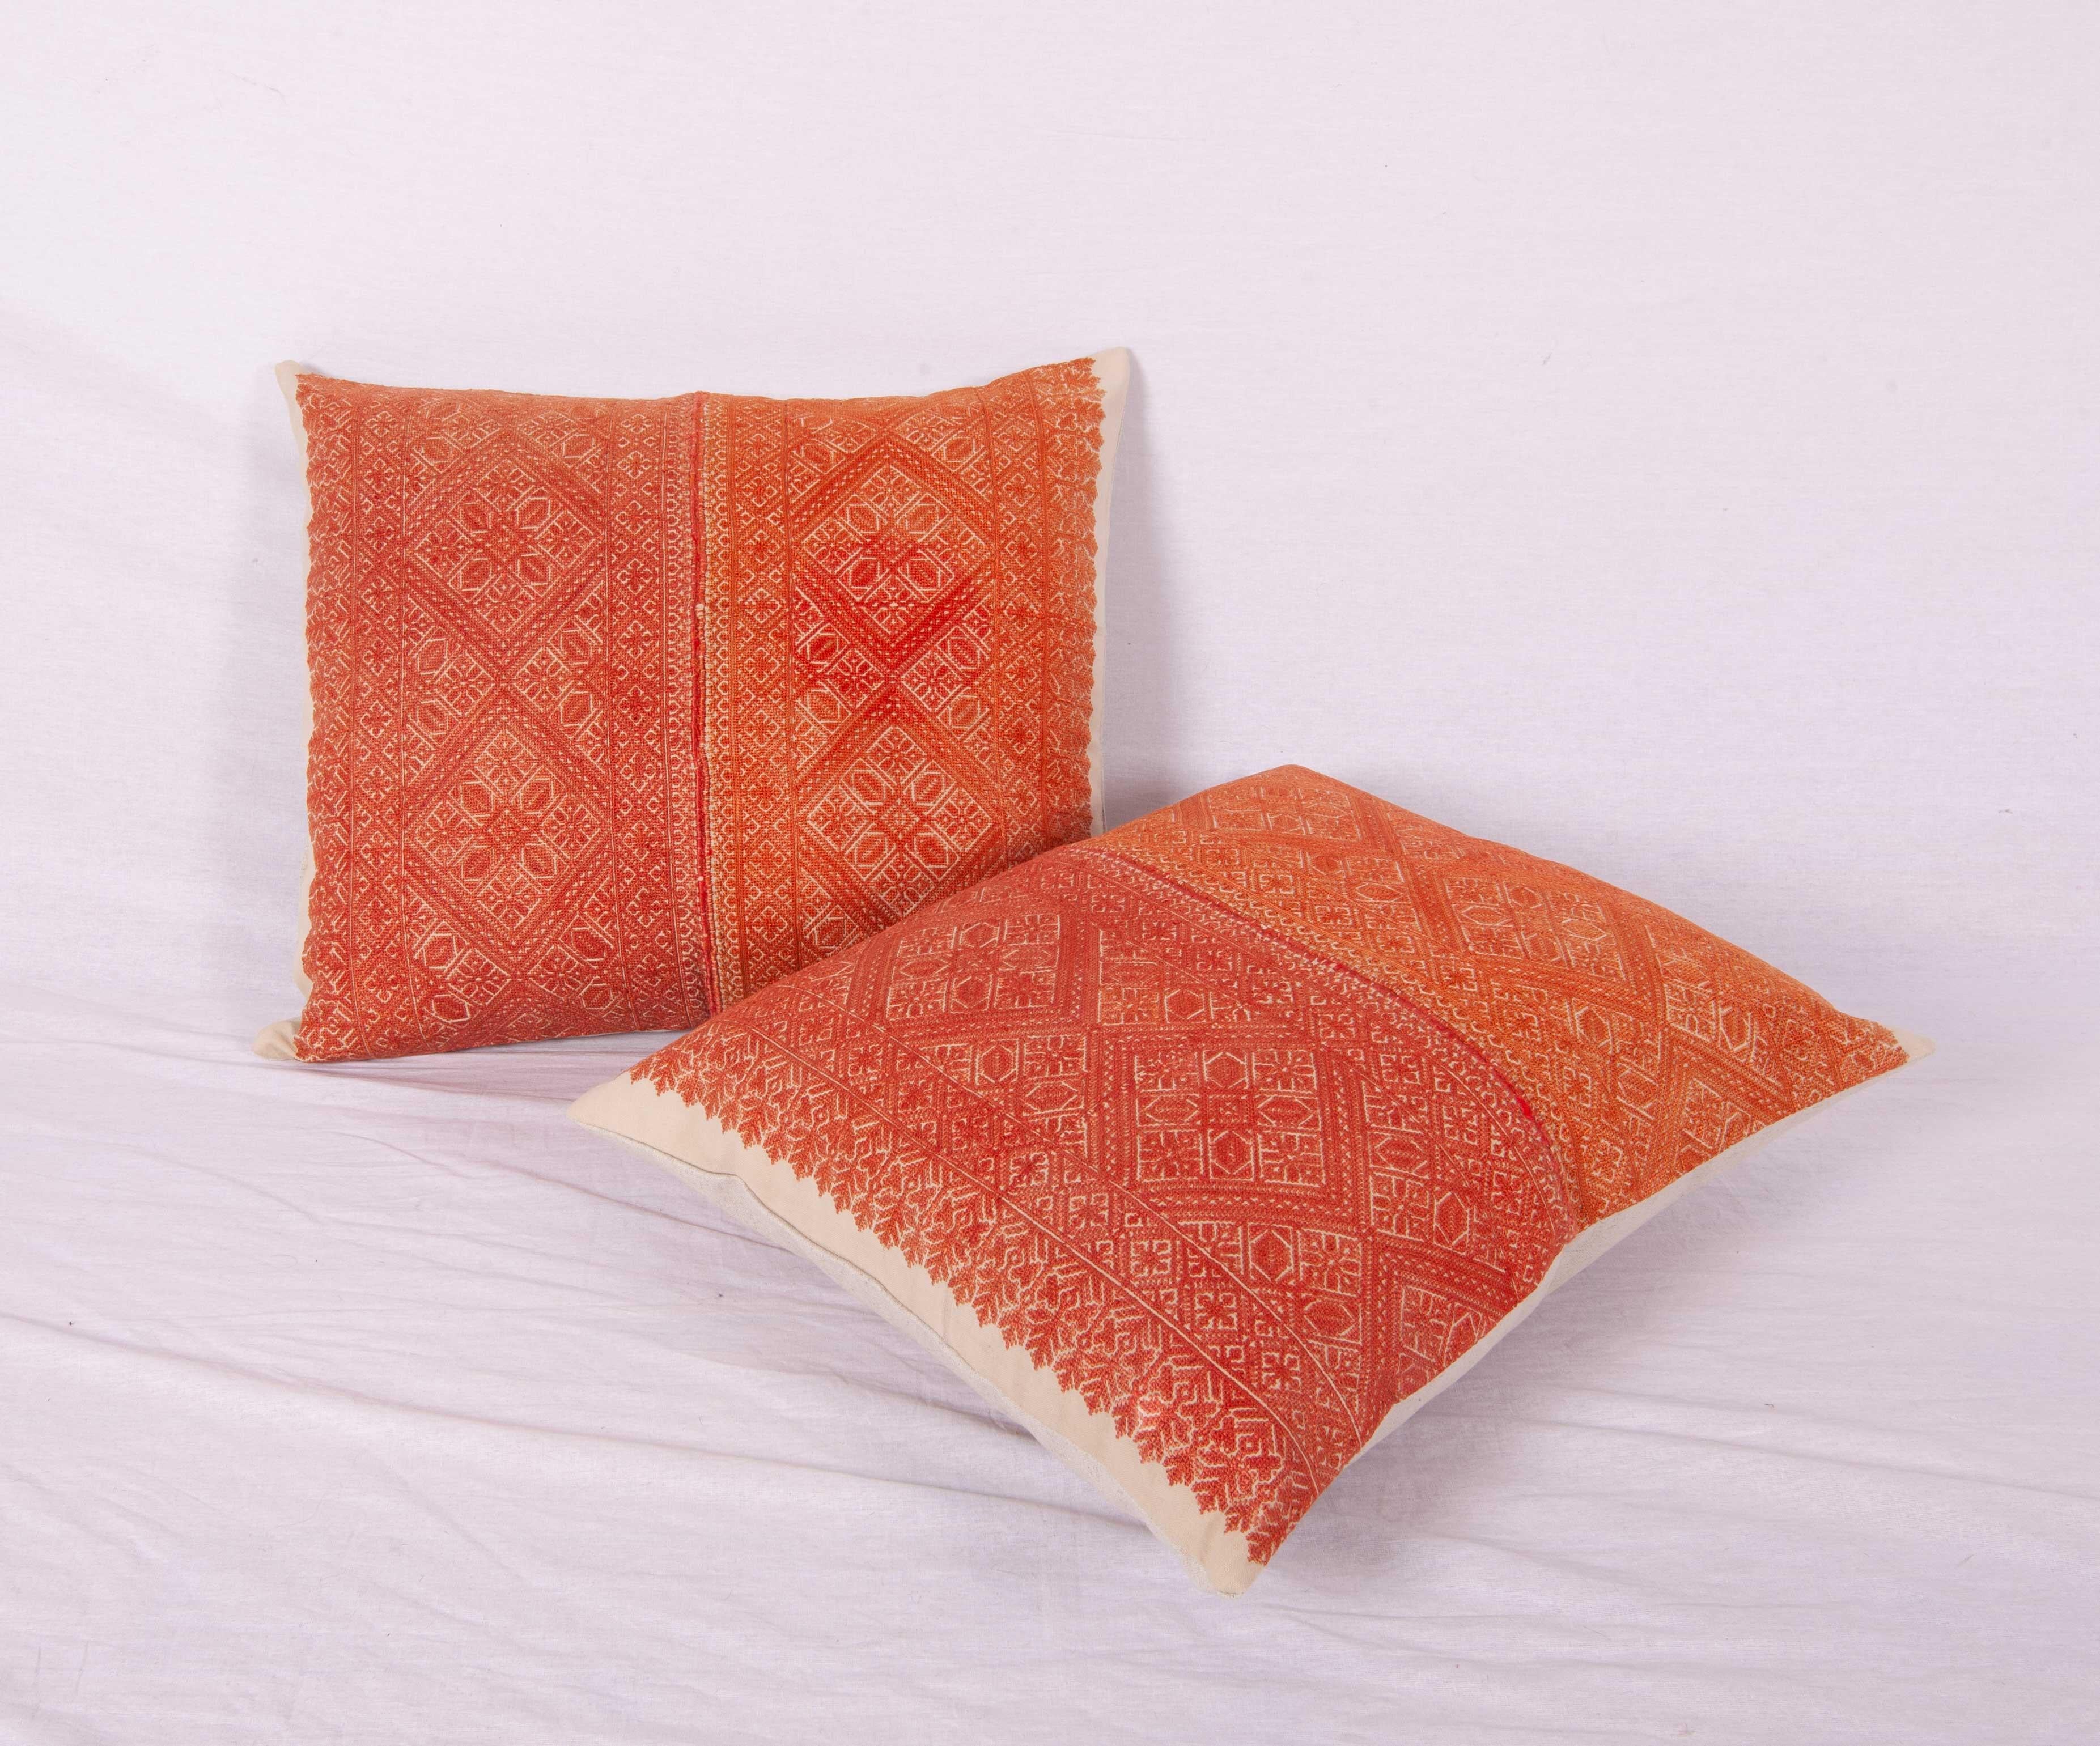 Embroidered Pillow Cases Made from an Early 20th Century Fez Embroidery from Morocco